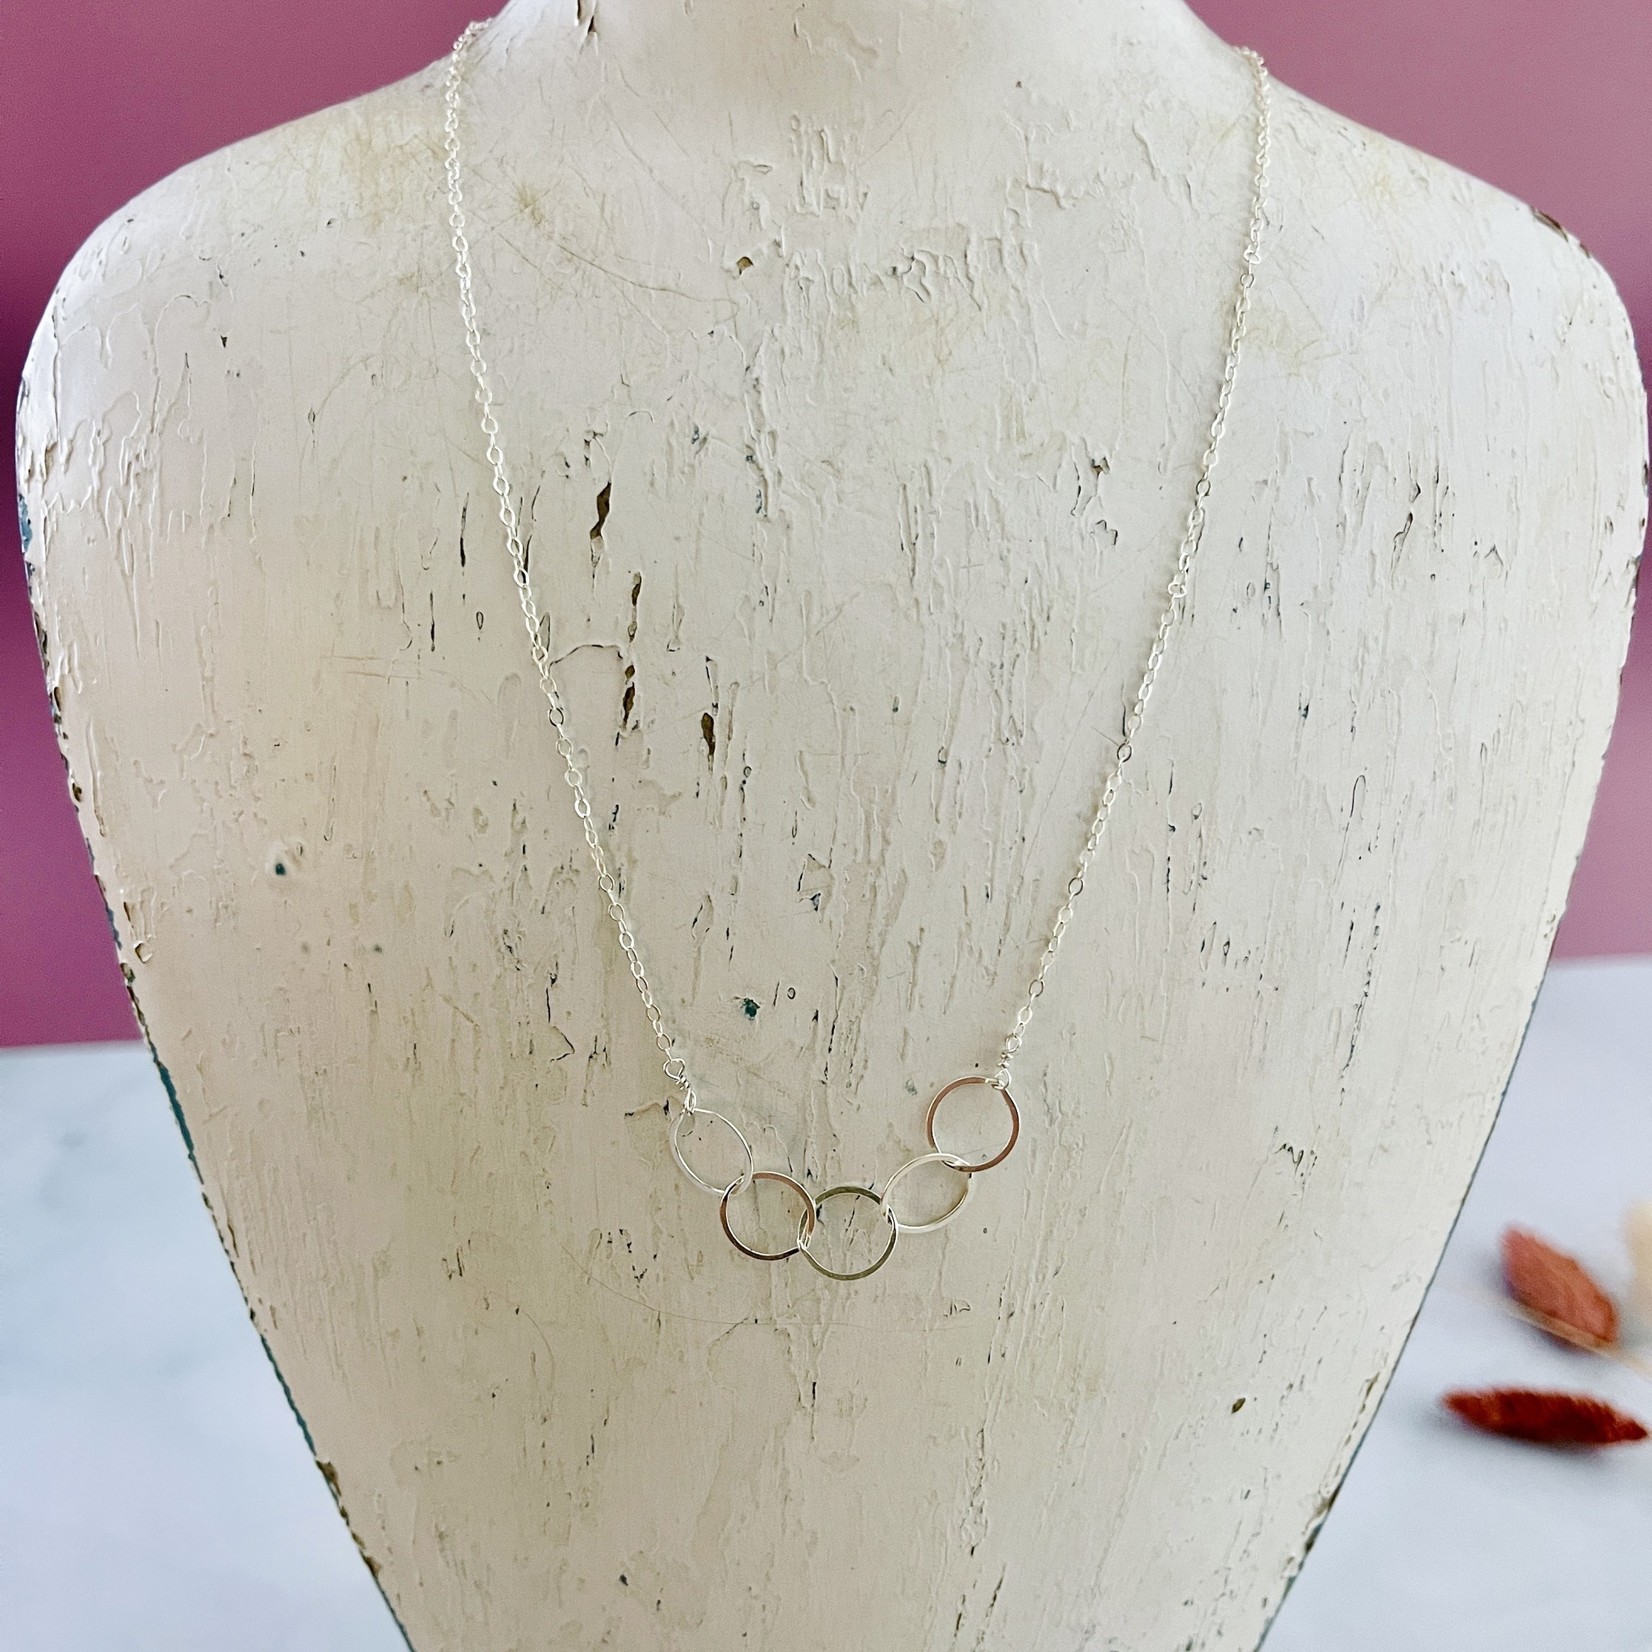 Judy Brandon Jewelry Sterling Silver 5 Linked Circles Necklace, 16.5+